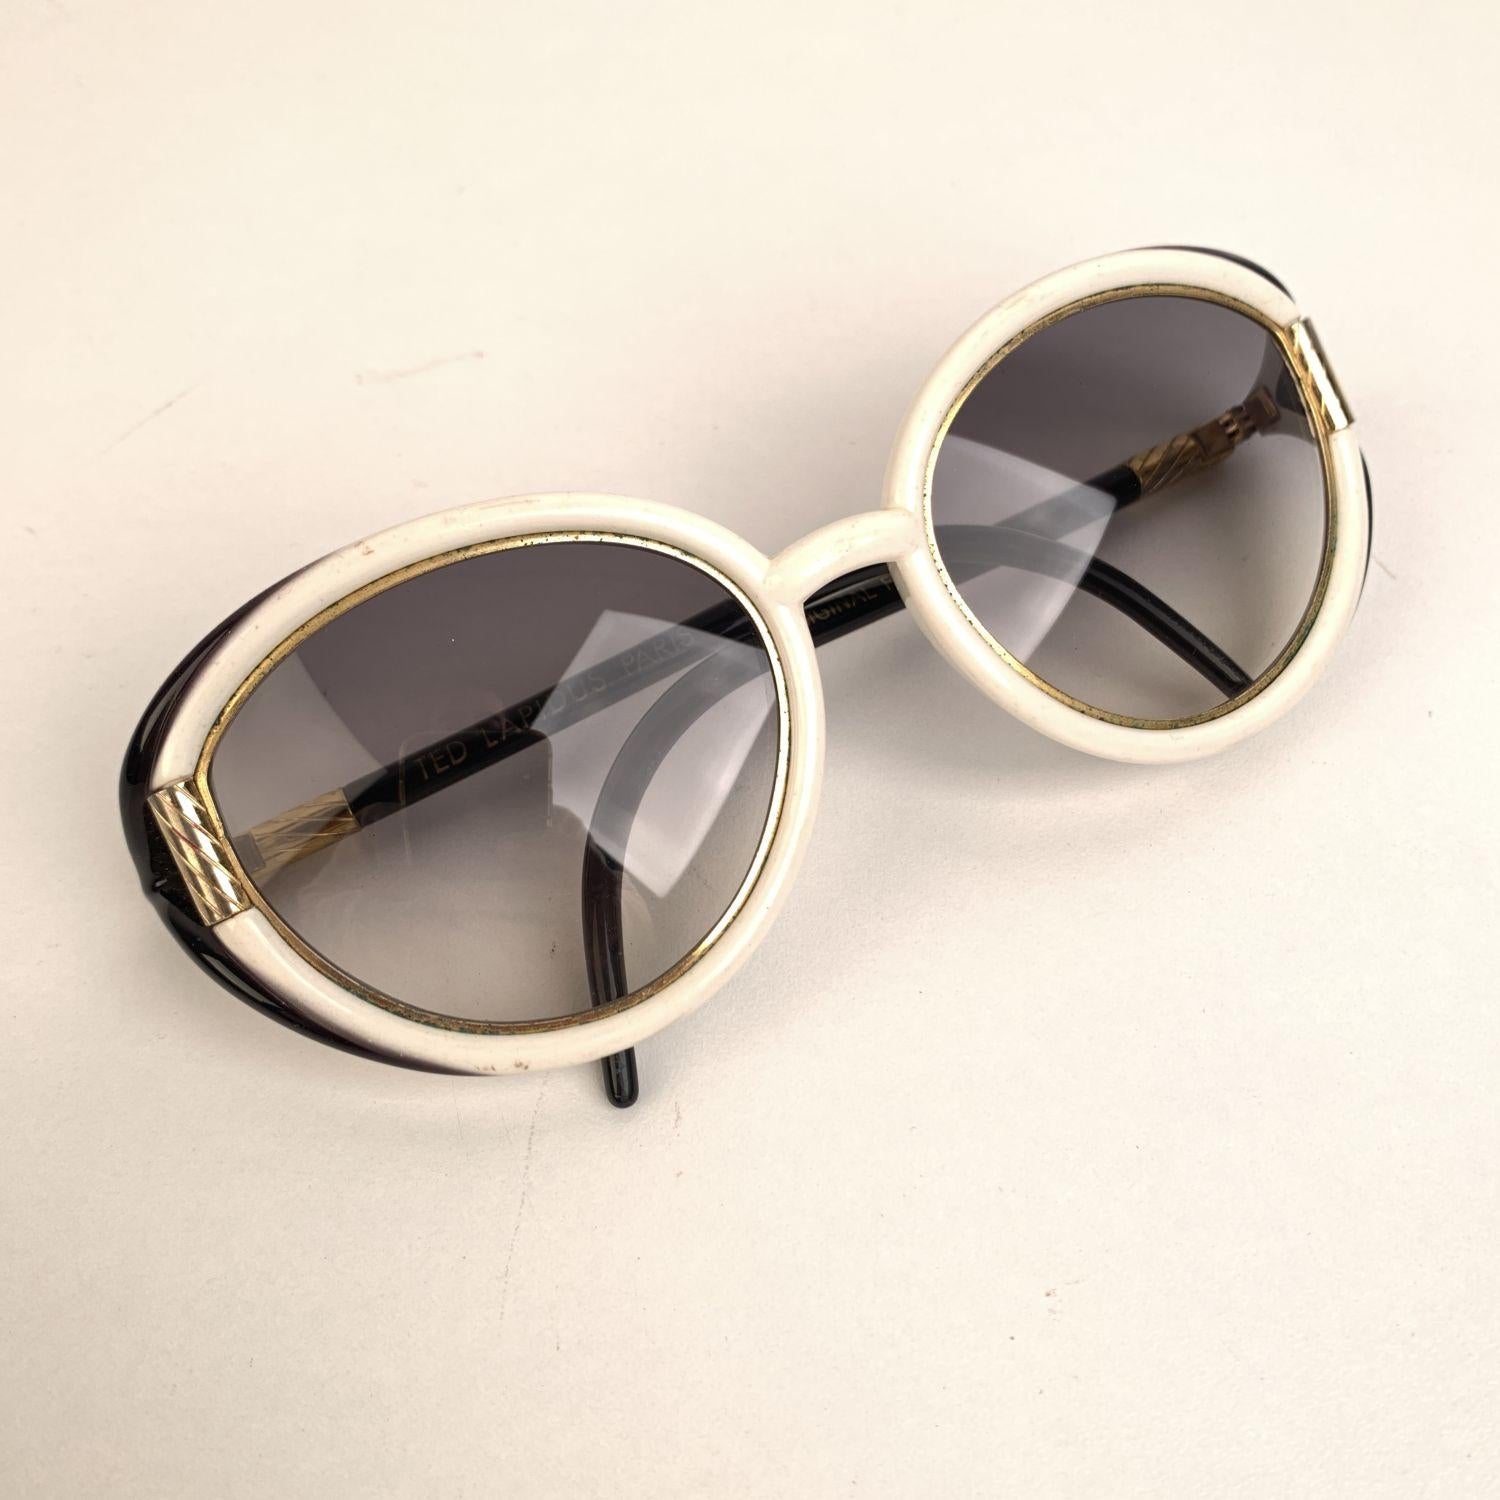 Rare vintage TED LAPIDUS oversized sunglasses. Made in France. Black and white color frame, with gold metal finish. Gray gradient lenses. 100% UV supreme quality lens.



Details

MATERIAL: Acetate

COLOR: White

MODEL: TL

GENDER: Women

SIZE: